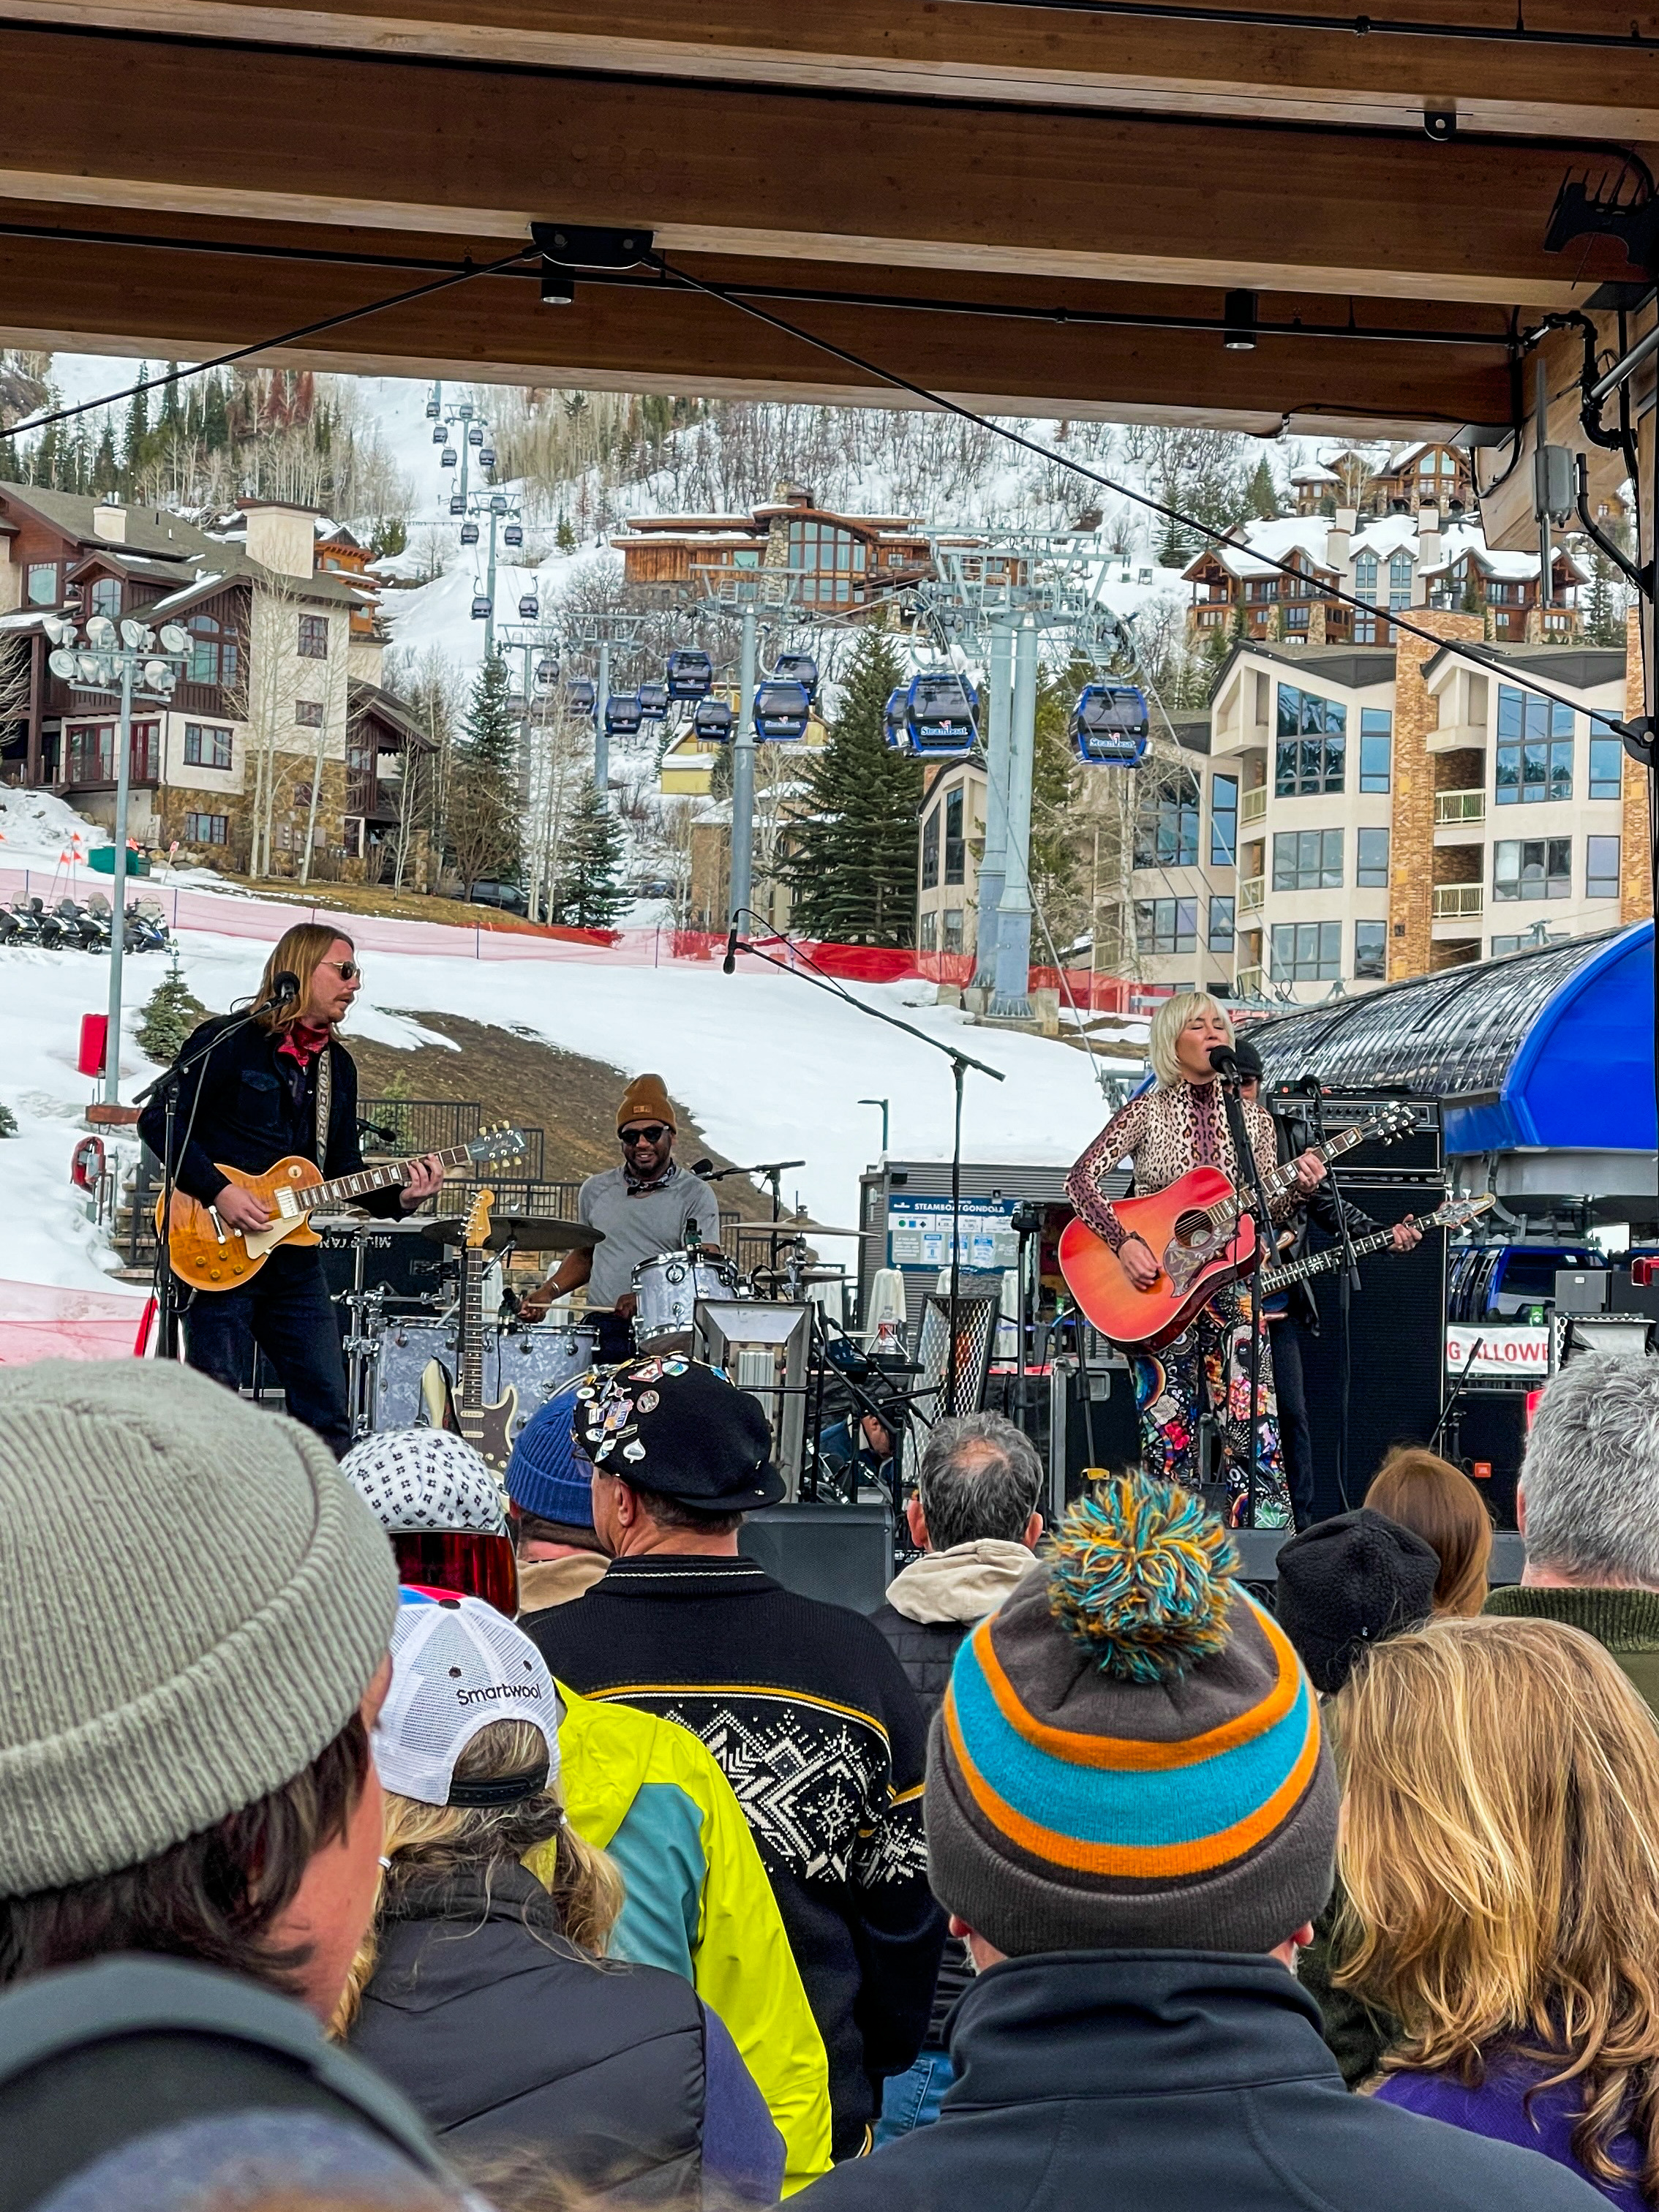 An outdoor concert in Steamboat Springs, played by a four-piece band with a woman singing. The ski lift can be seen in behind the stage, as can the resort’s hotels.